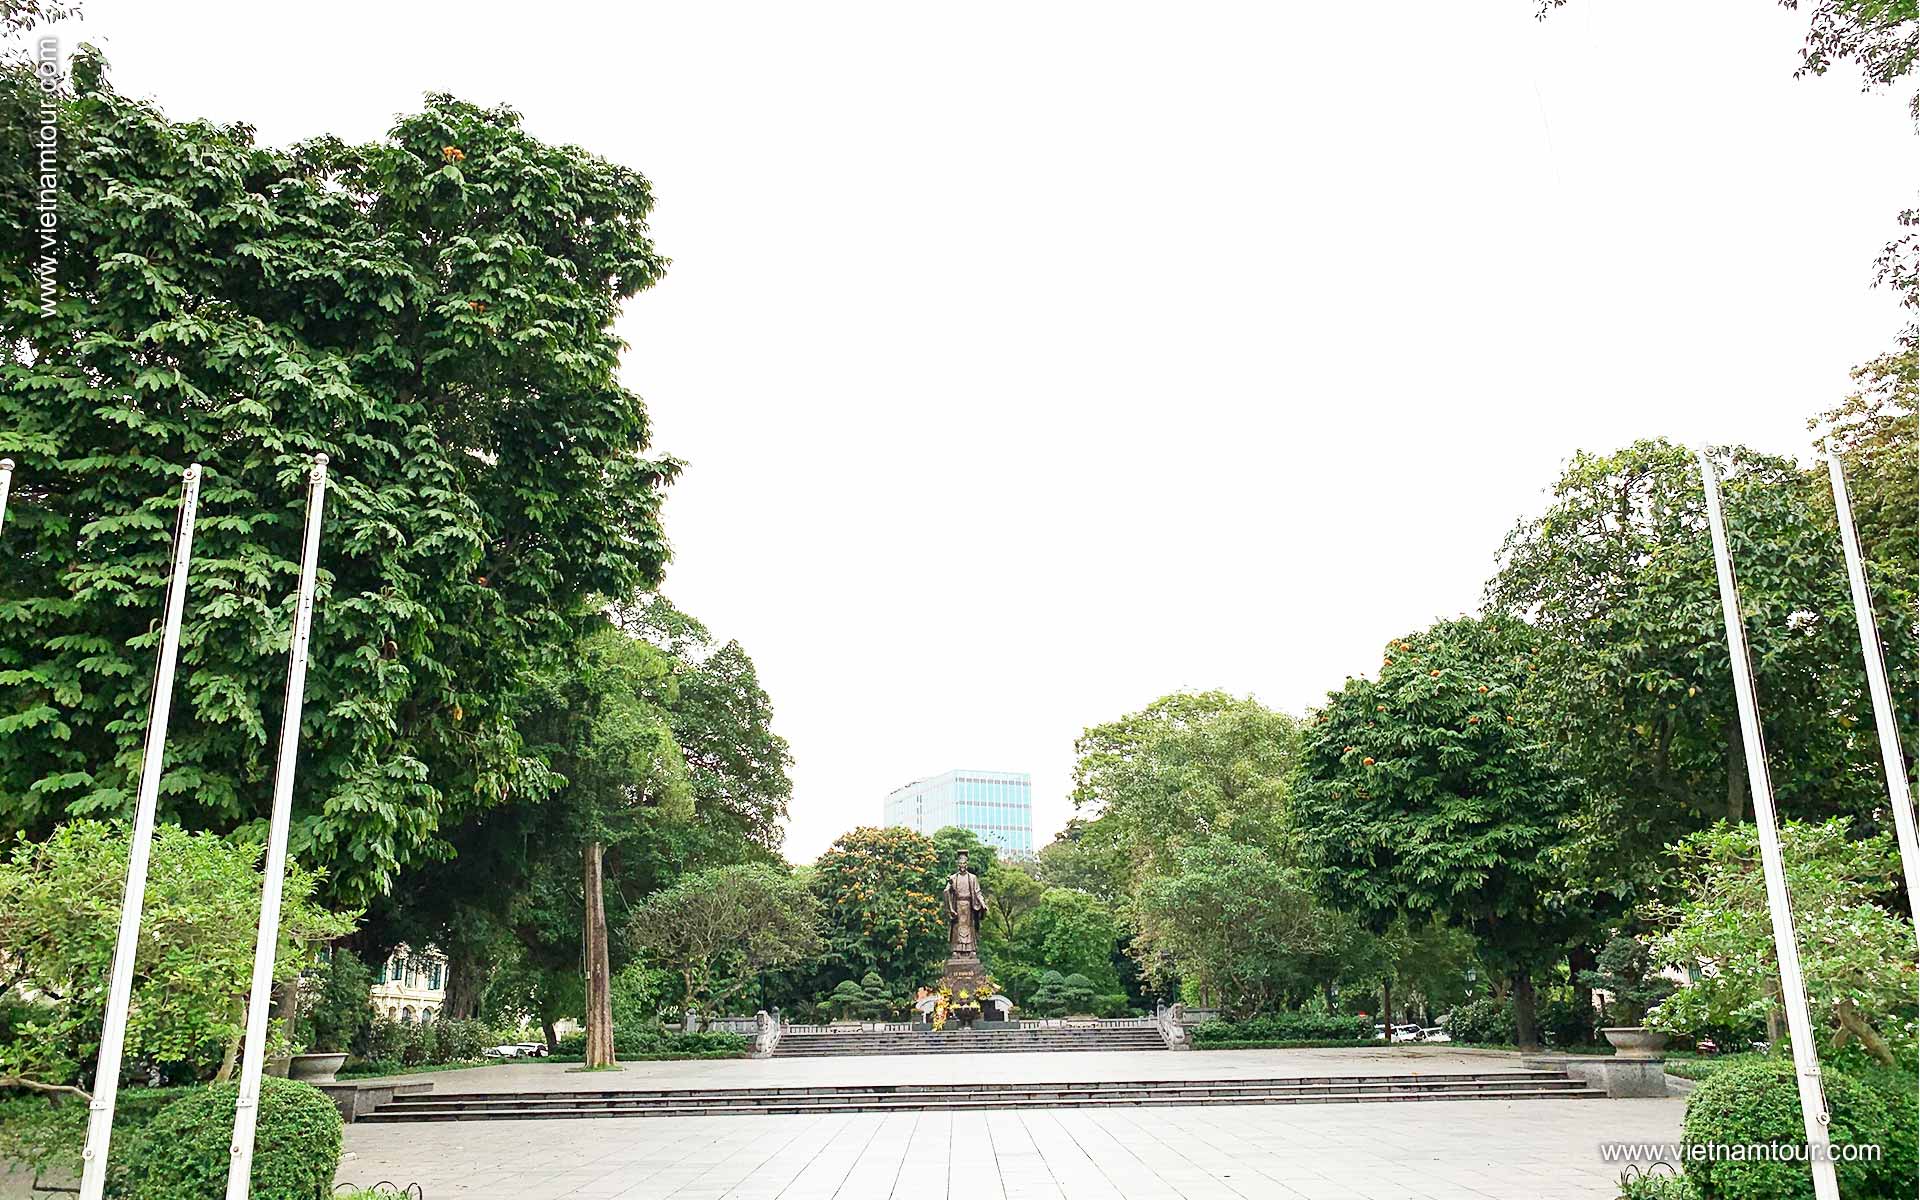 Statue of King Ly Thai To